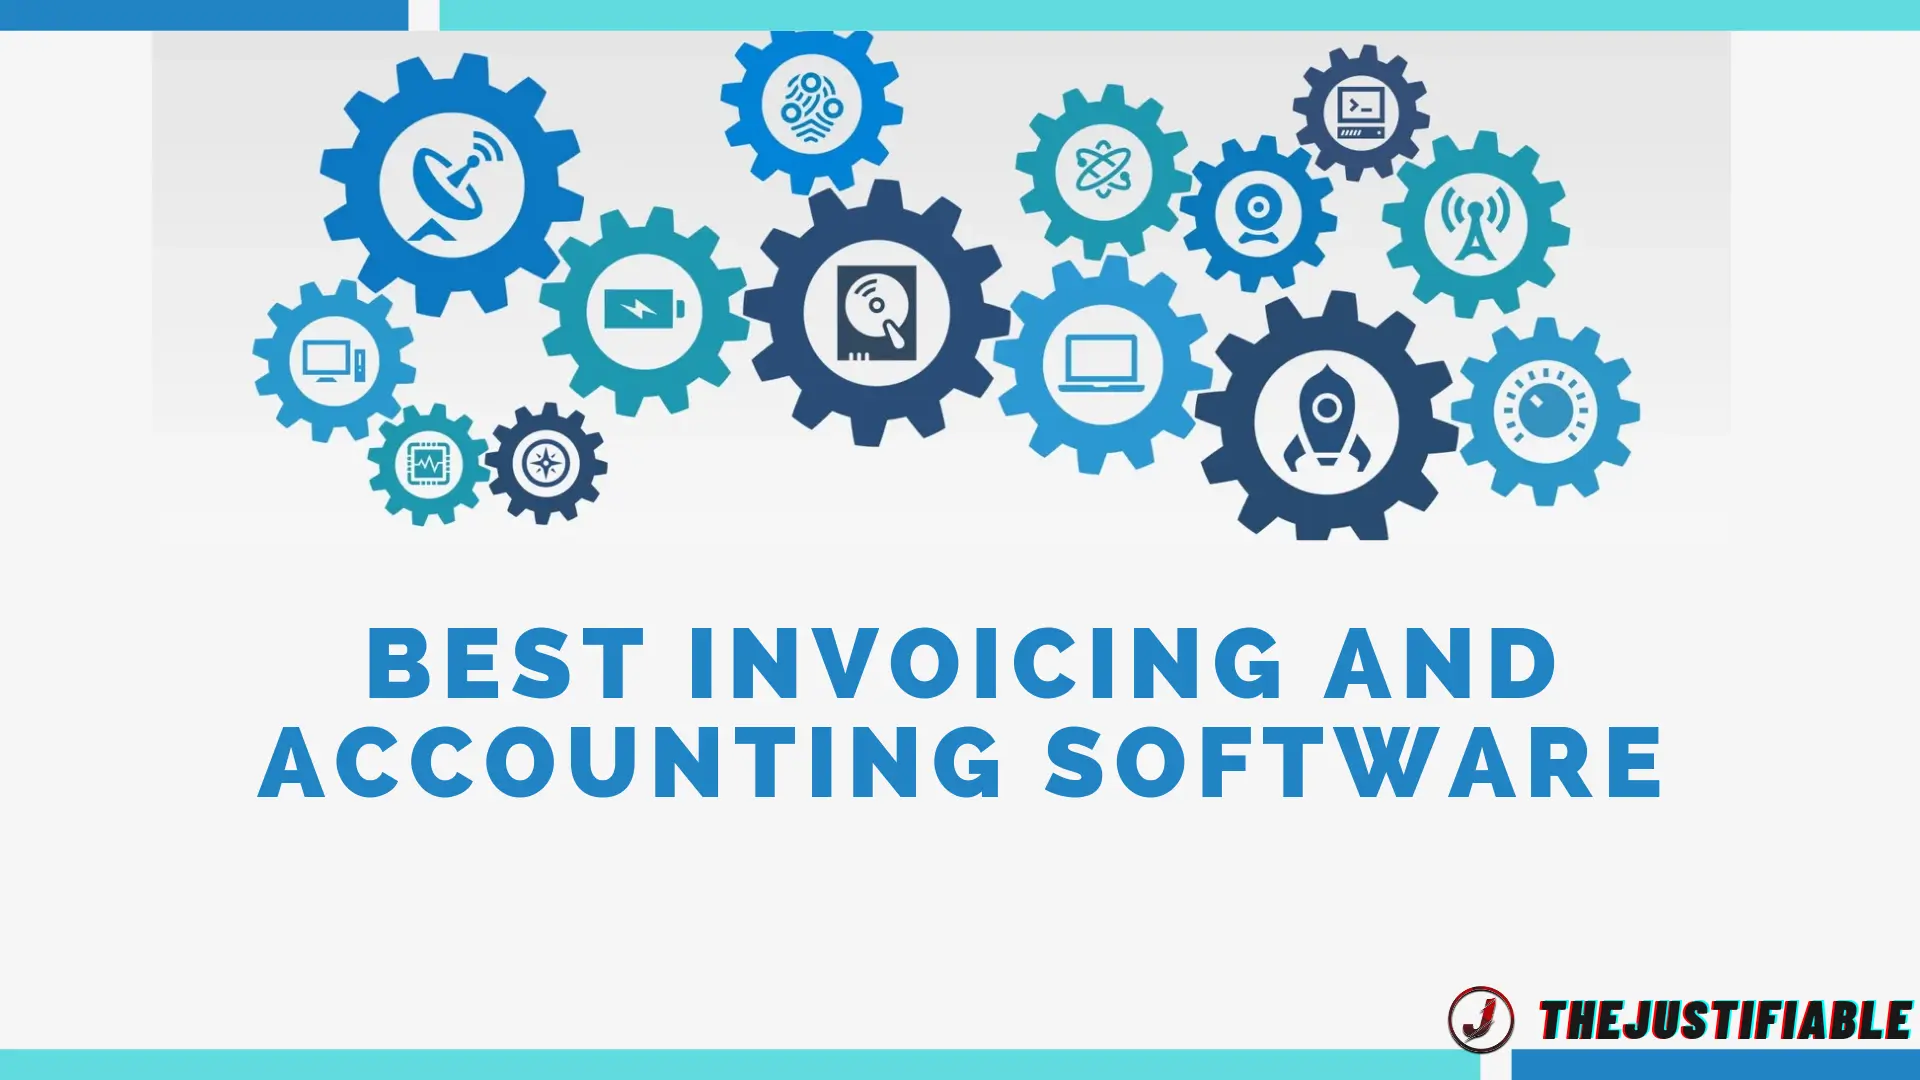 The image is a graphic related to Invoicing and Accounting.